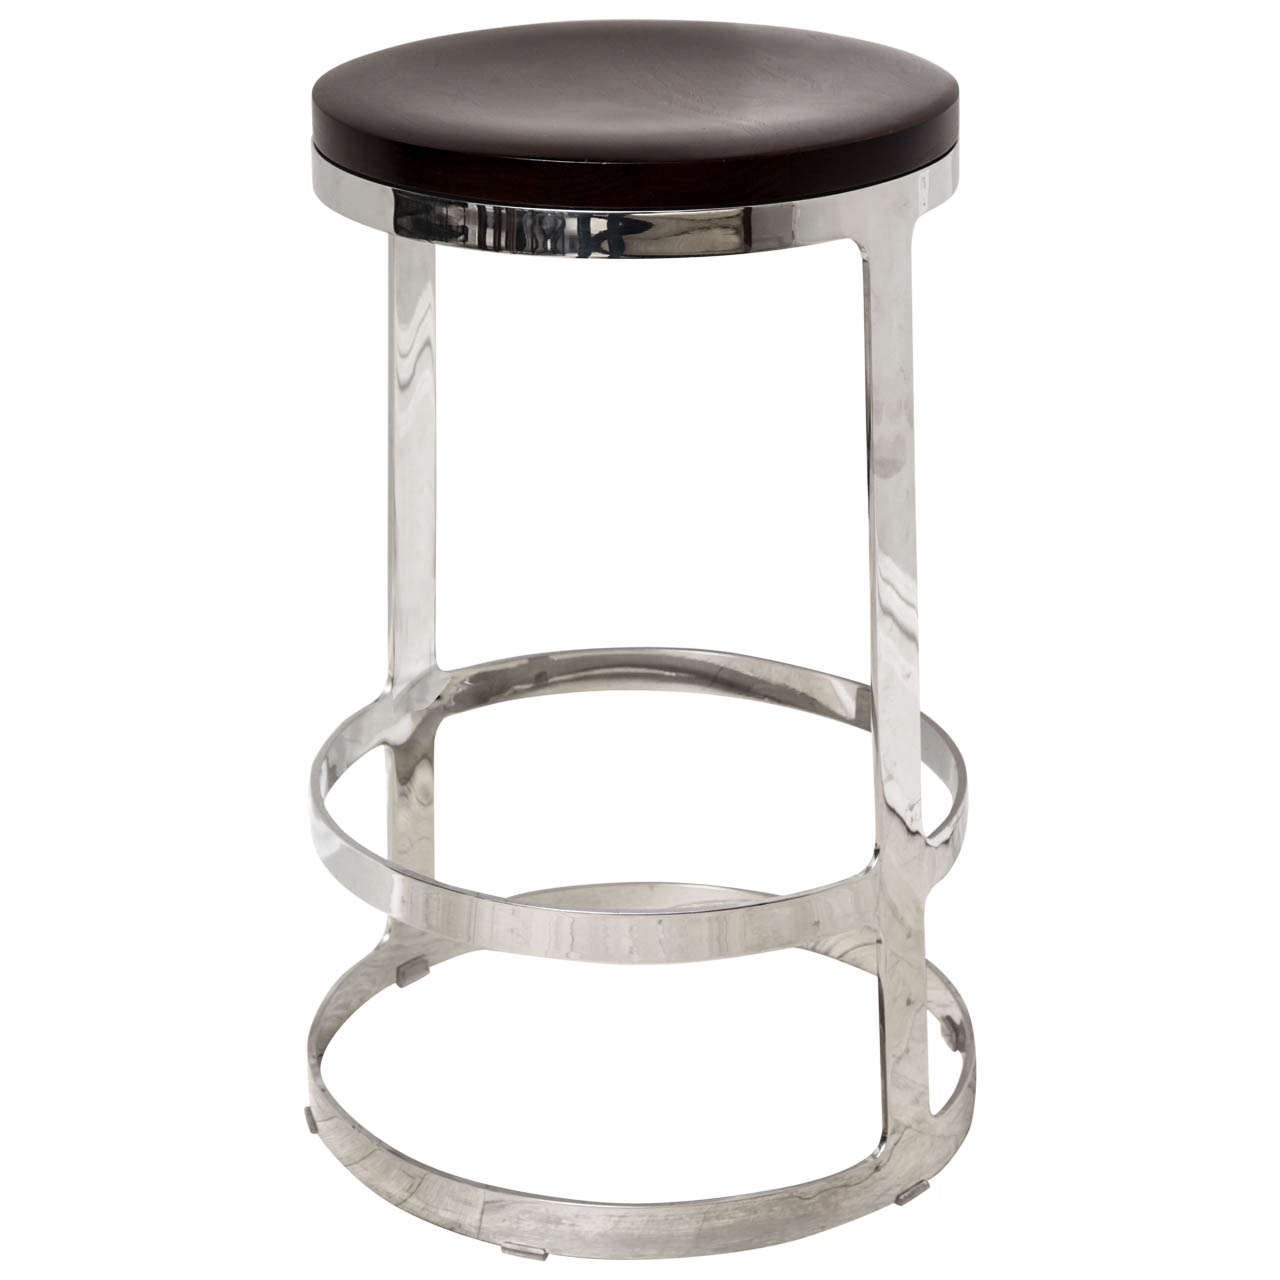 Lucca & Co., Made to Order Bar Stool with Walnut Seat